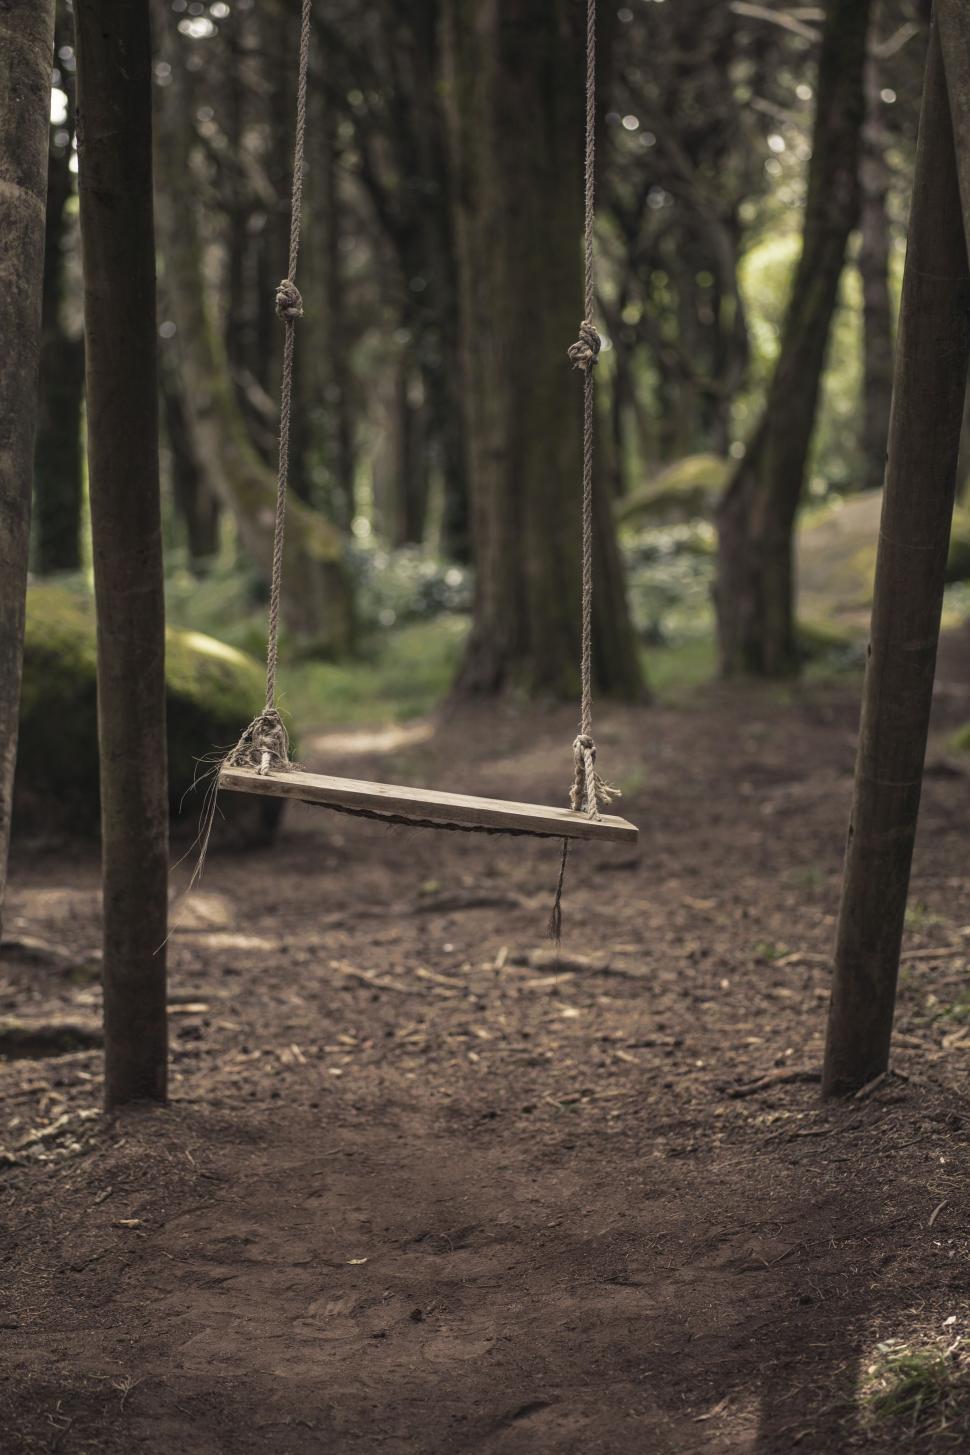 Free Image of Swing Hanging From Tree in Forest 